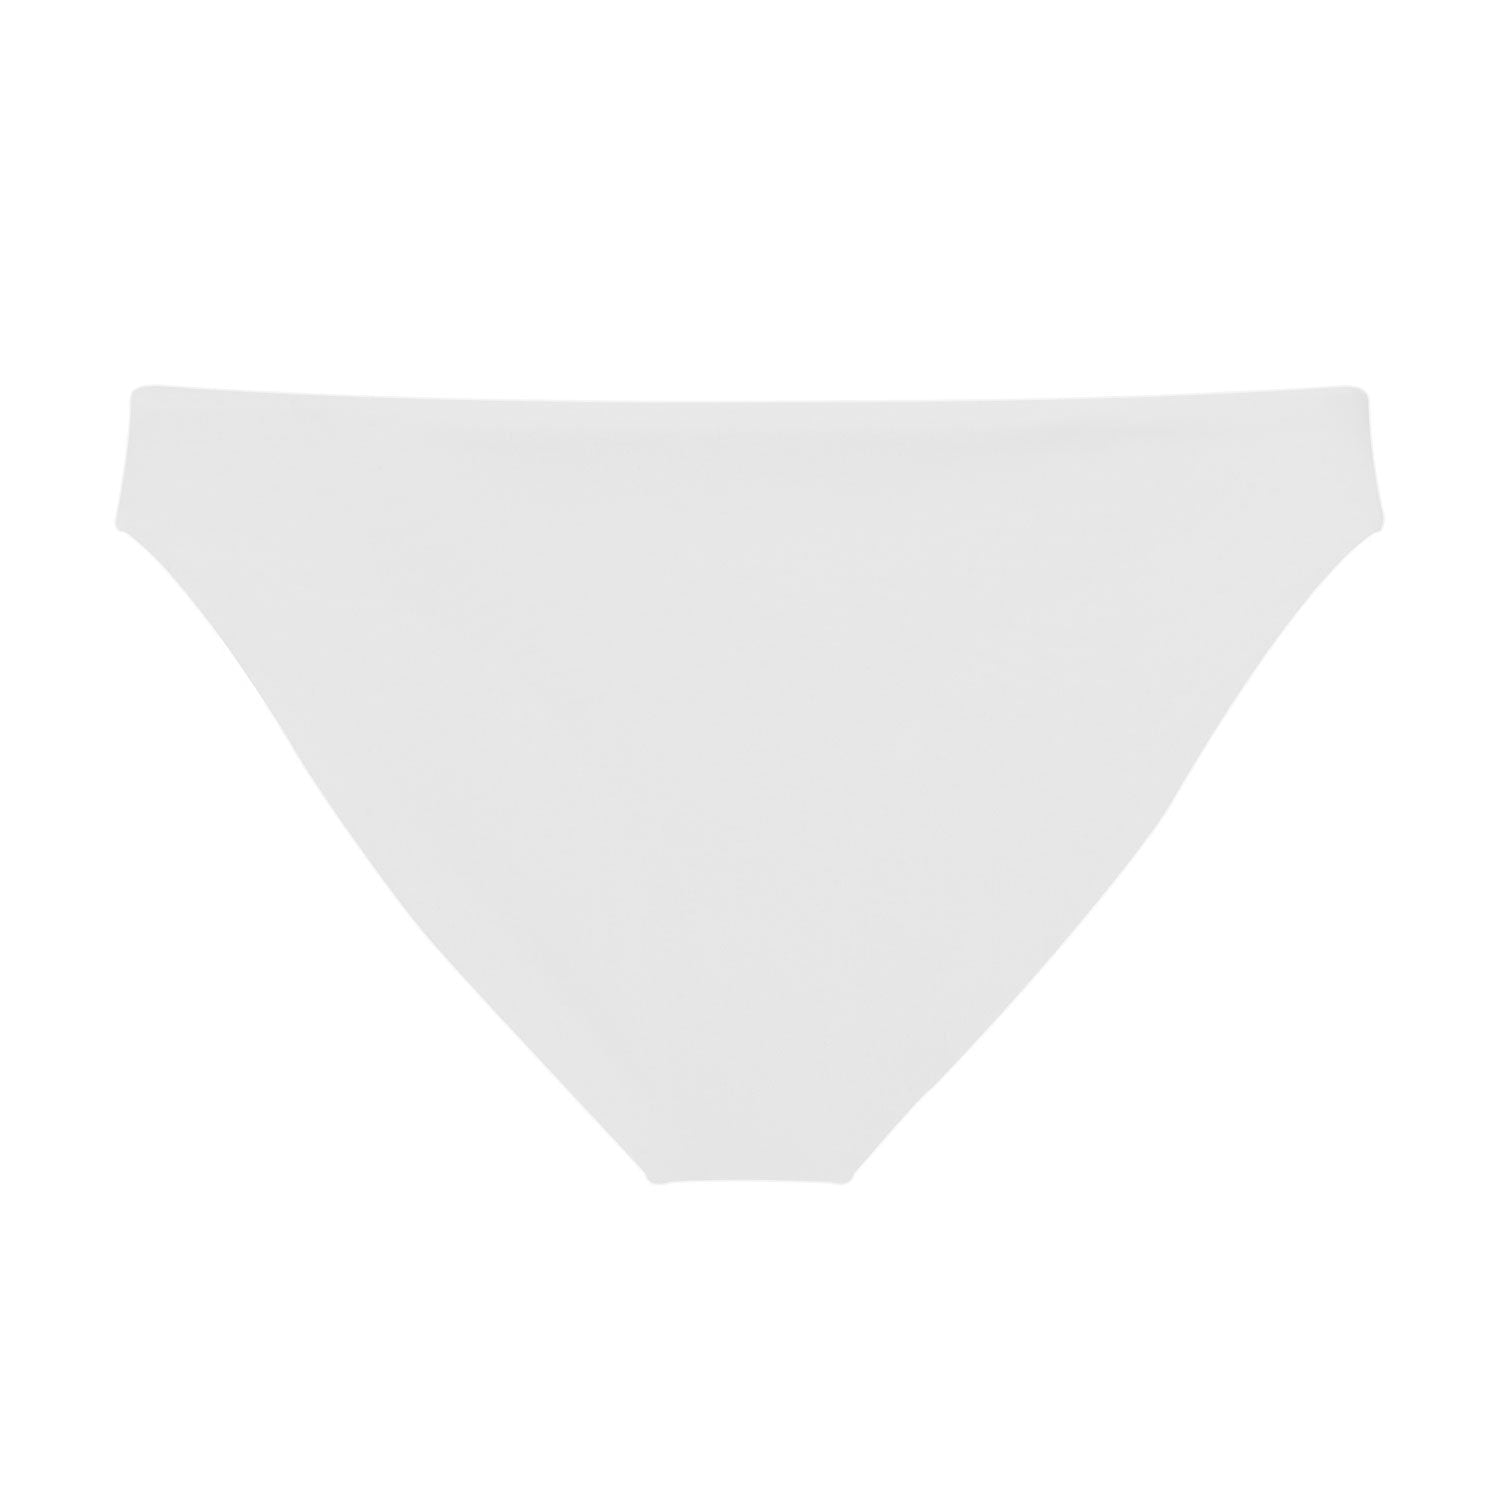 Load image into Gallery viewer, Flat image of the back of Lure Bottom in White